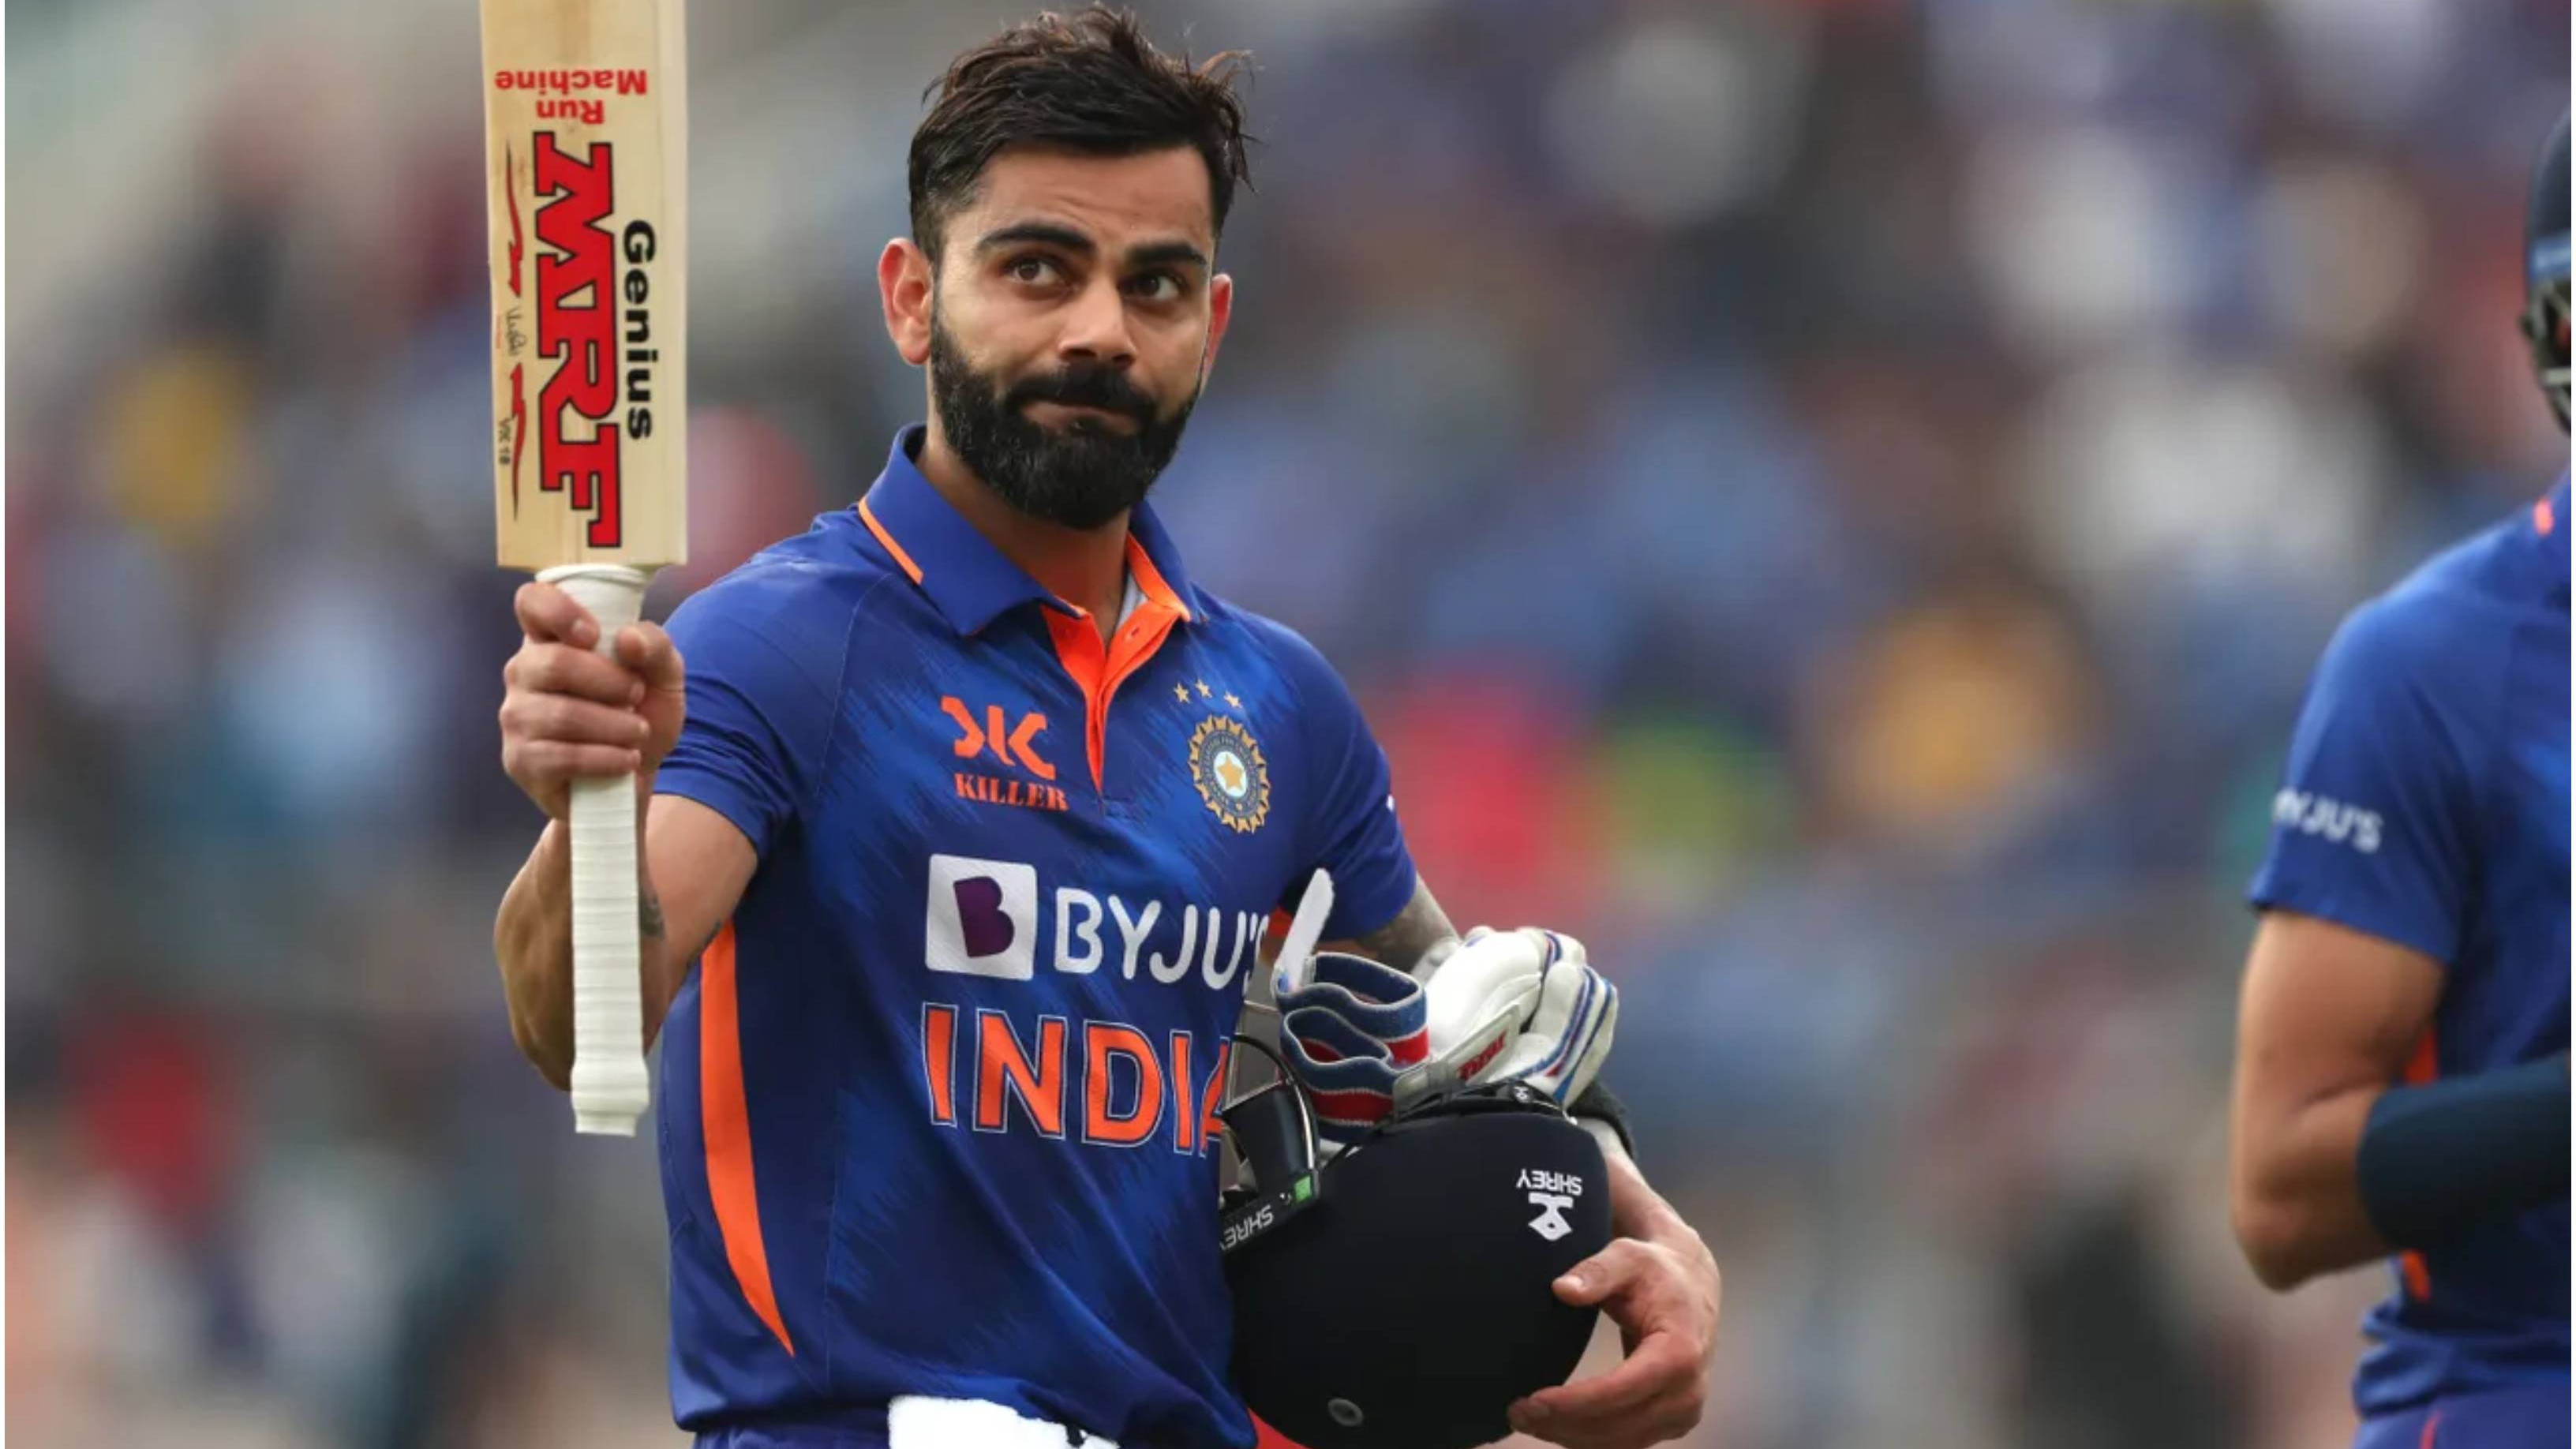 Pakistan batter gives a befitting reply as journalist tries to troll Virat Kohli citing he performs 